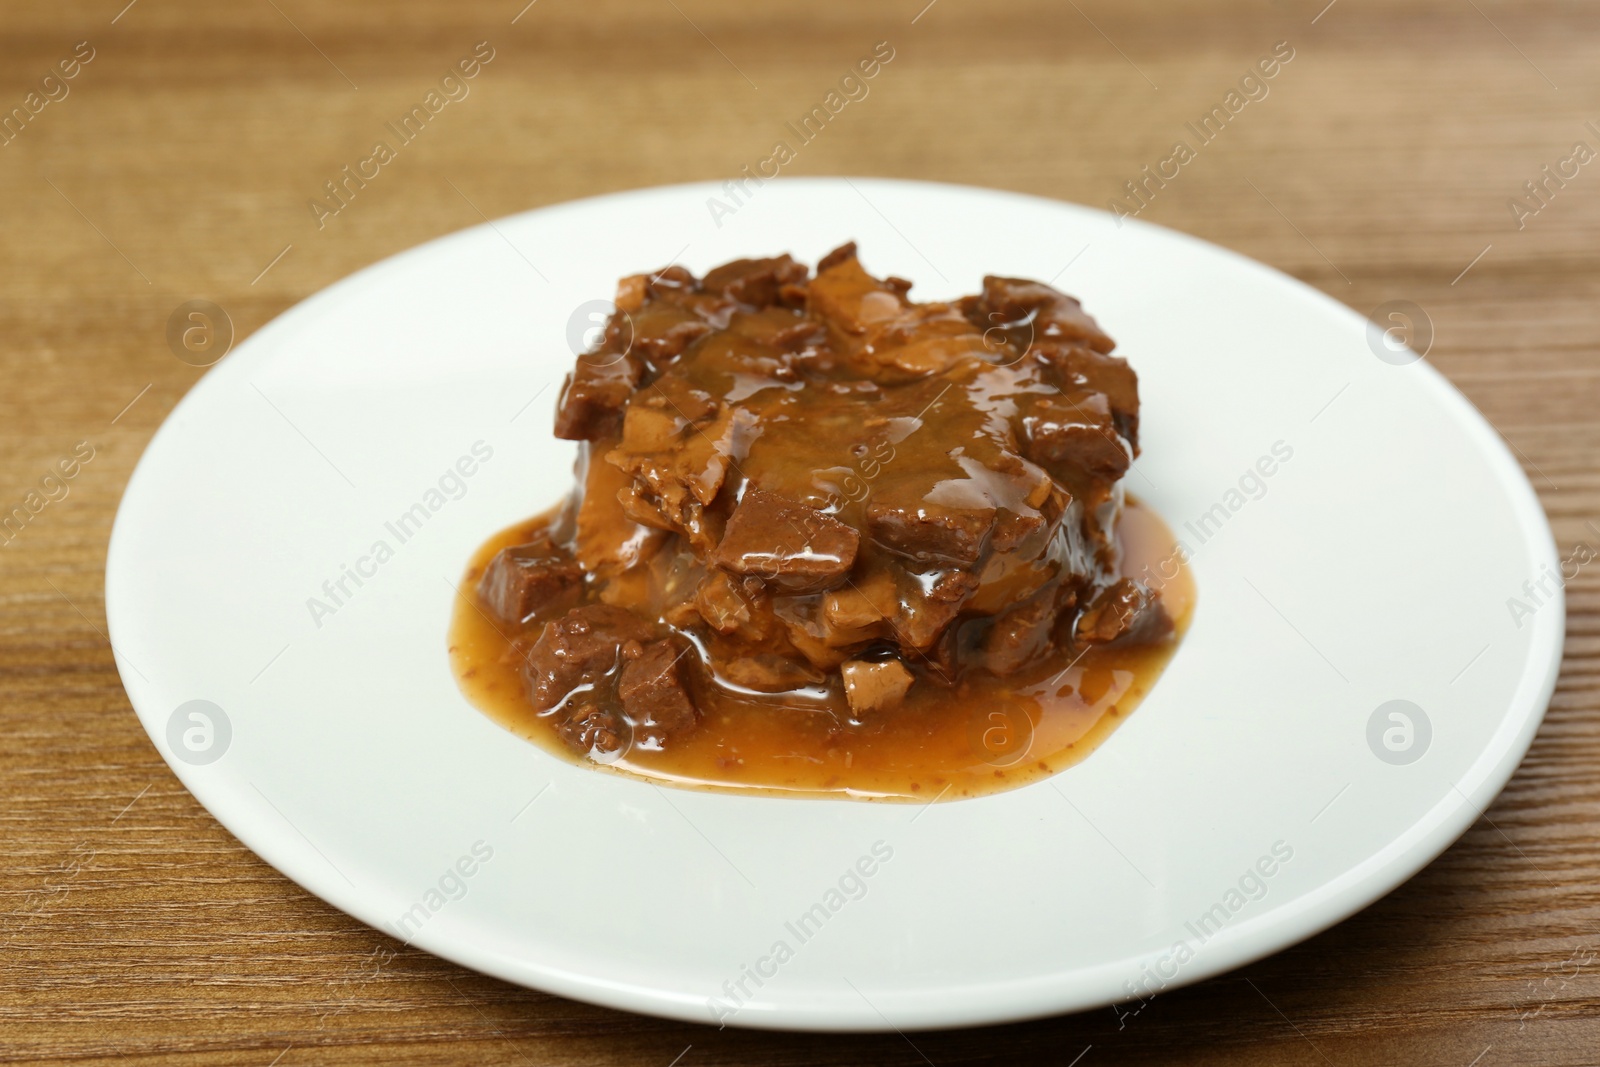 Photo of Plate with wet pet food on wooden table